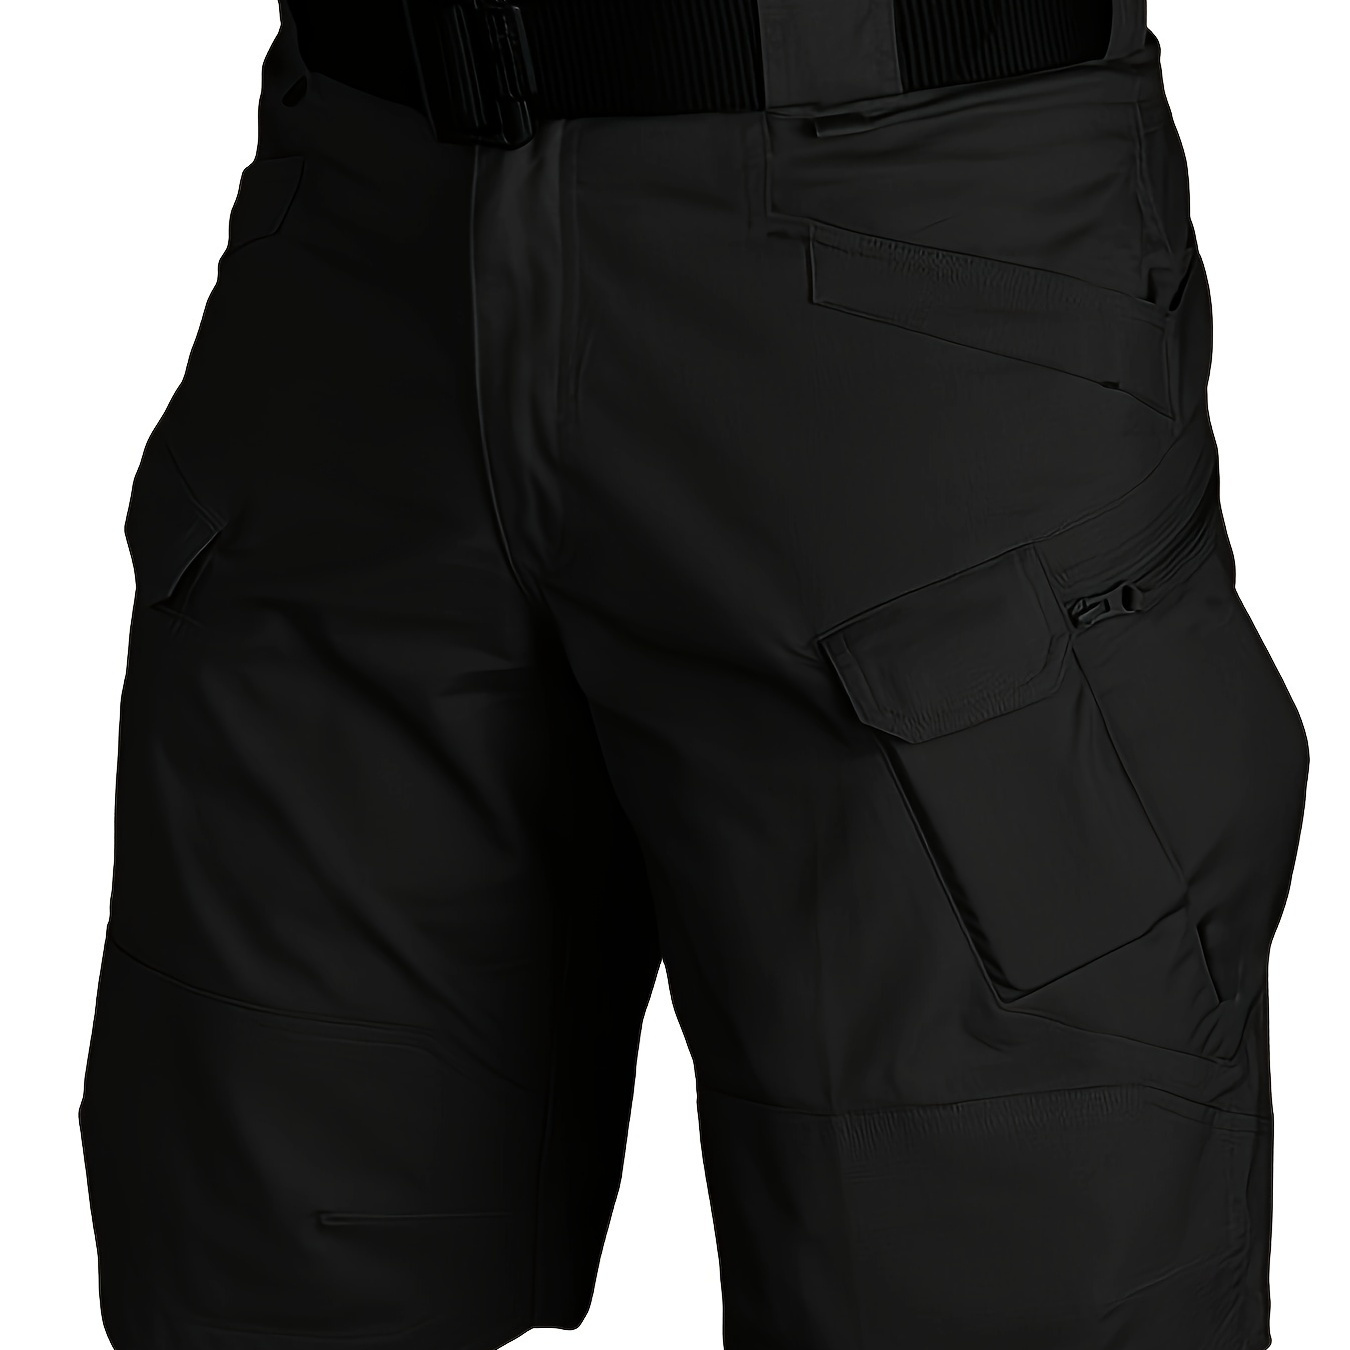 

Men's Tactical Shorts With Multi Pockets, Casual Durable Waterproof Cargo Shorts For Outdoor Hiking Trekking